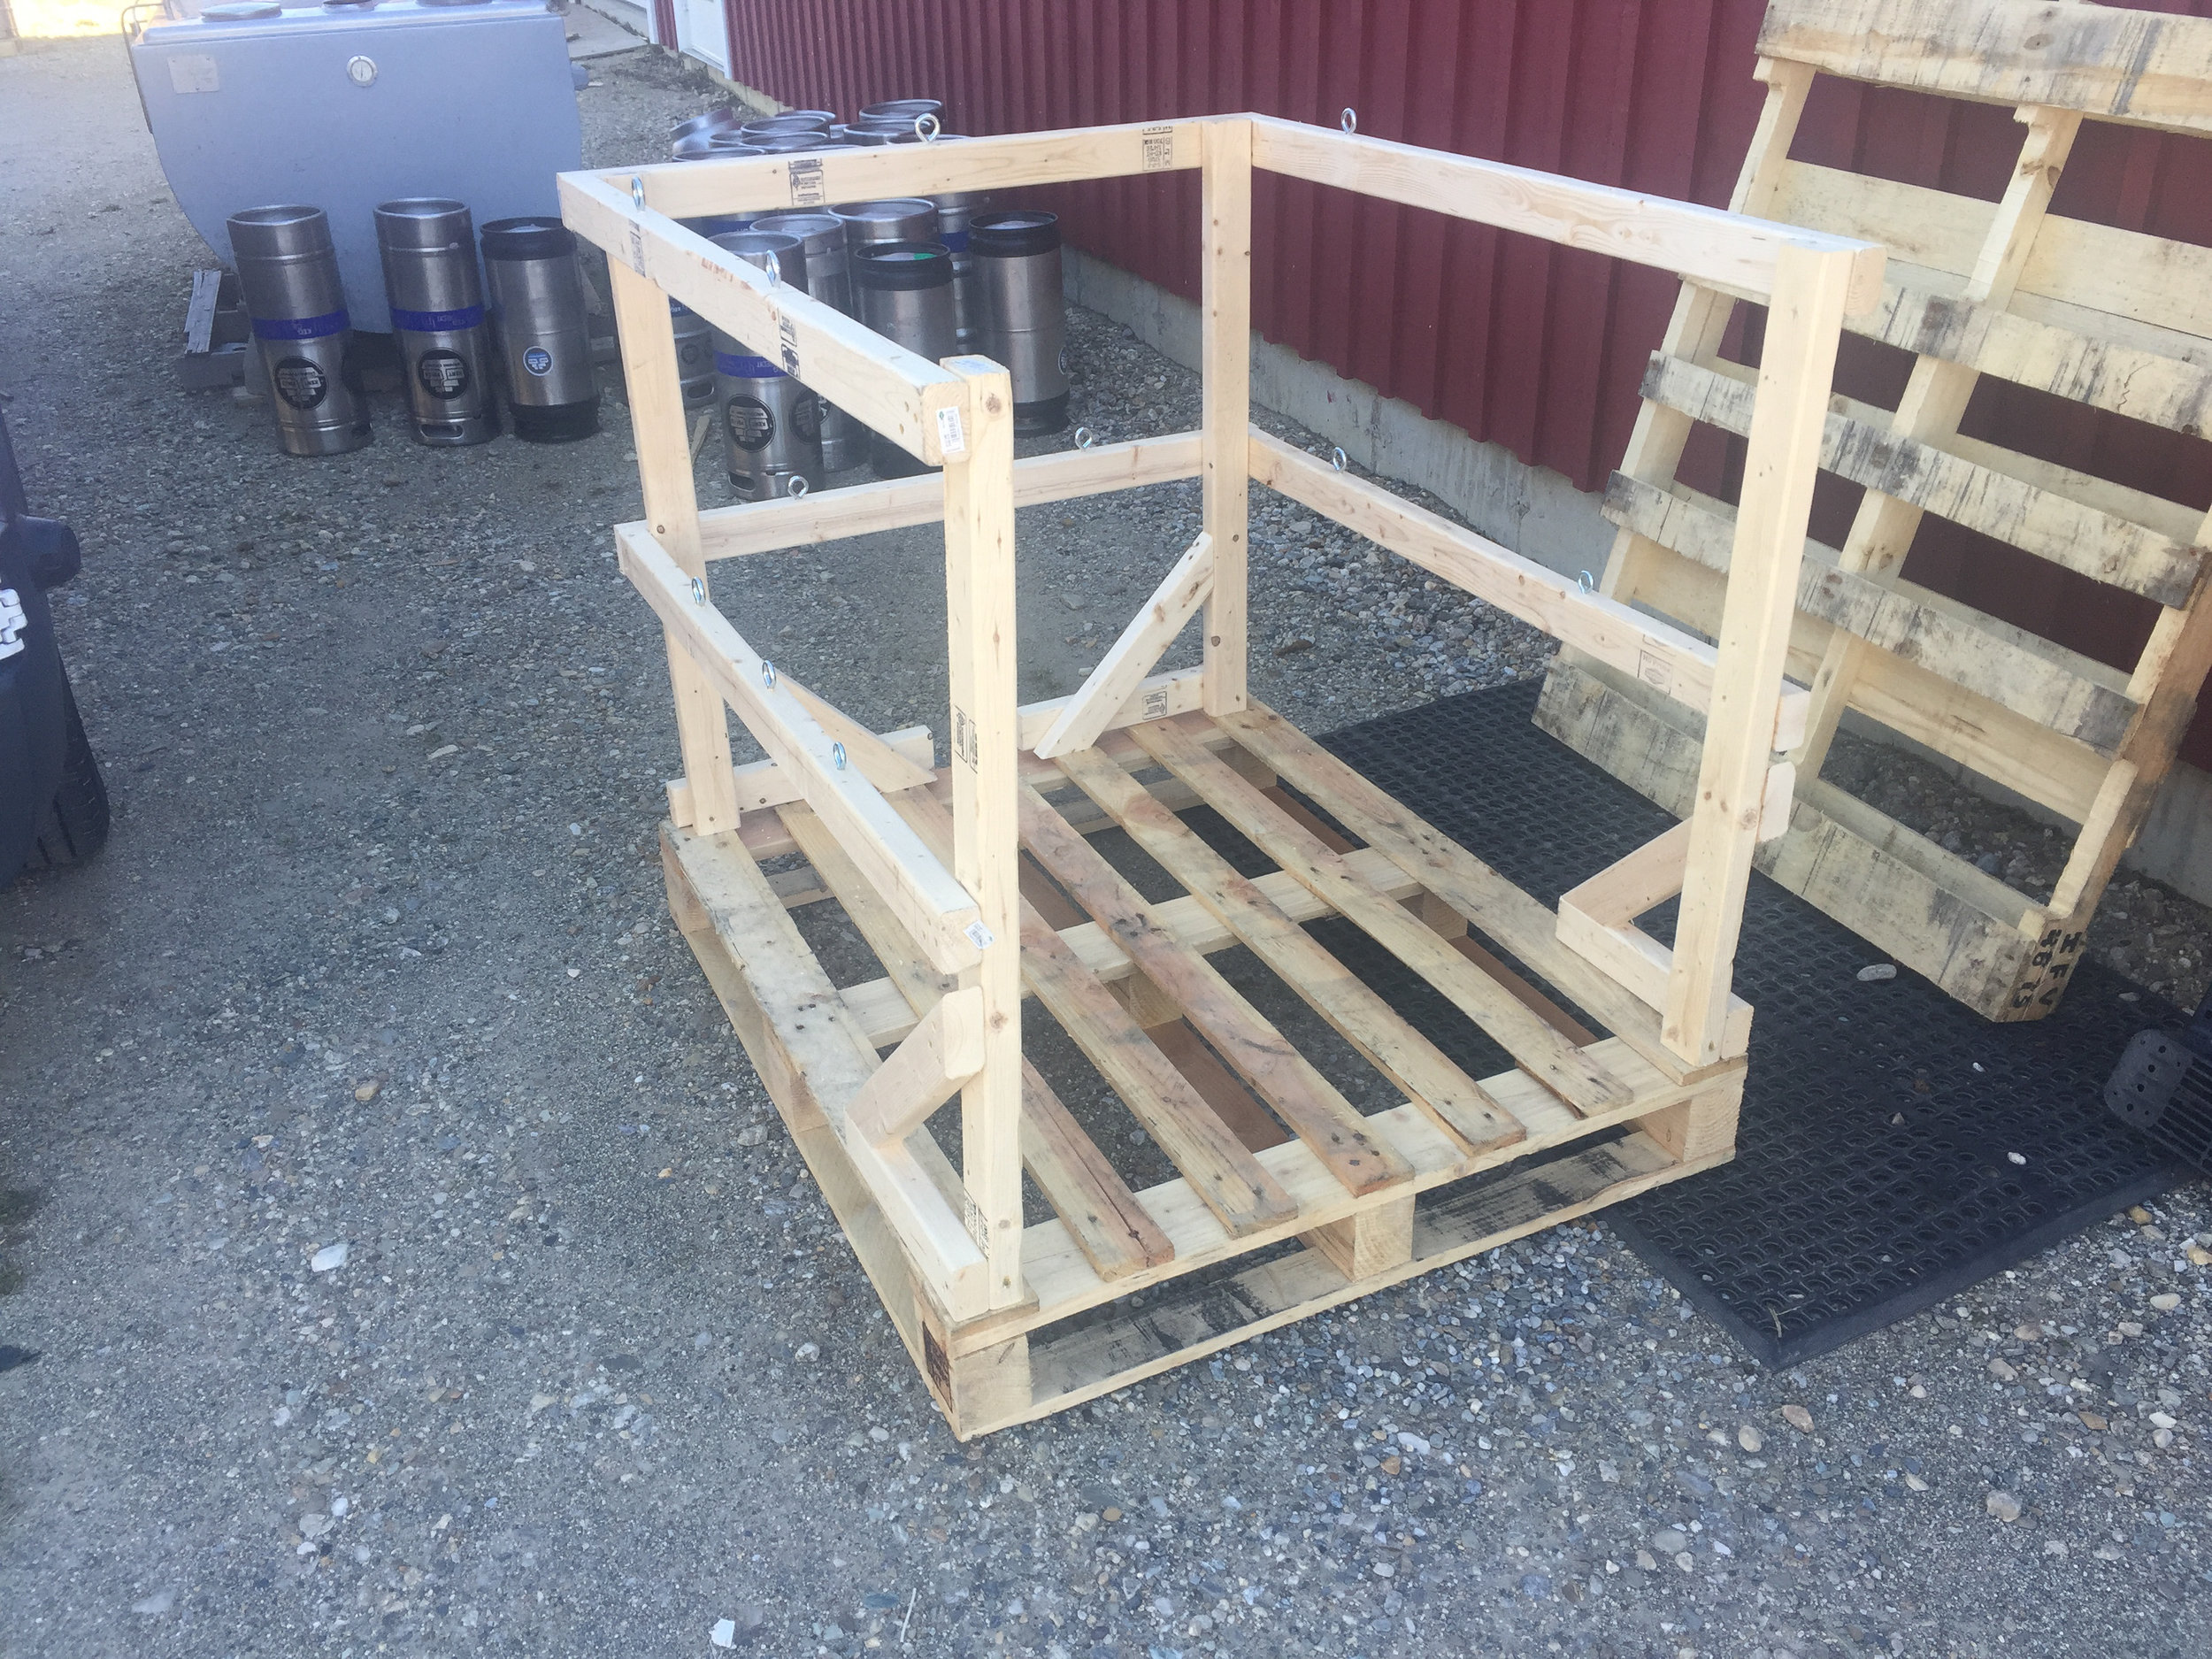  I also designed and built these handy dandy pallets for our beer delivery van. 